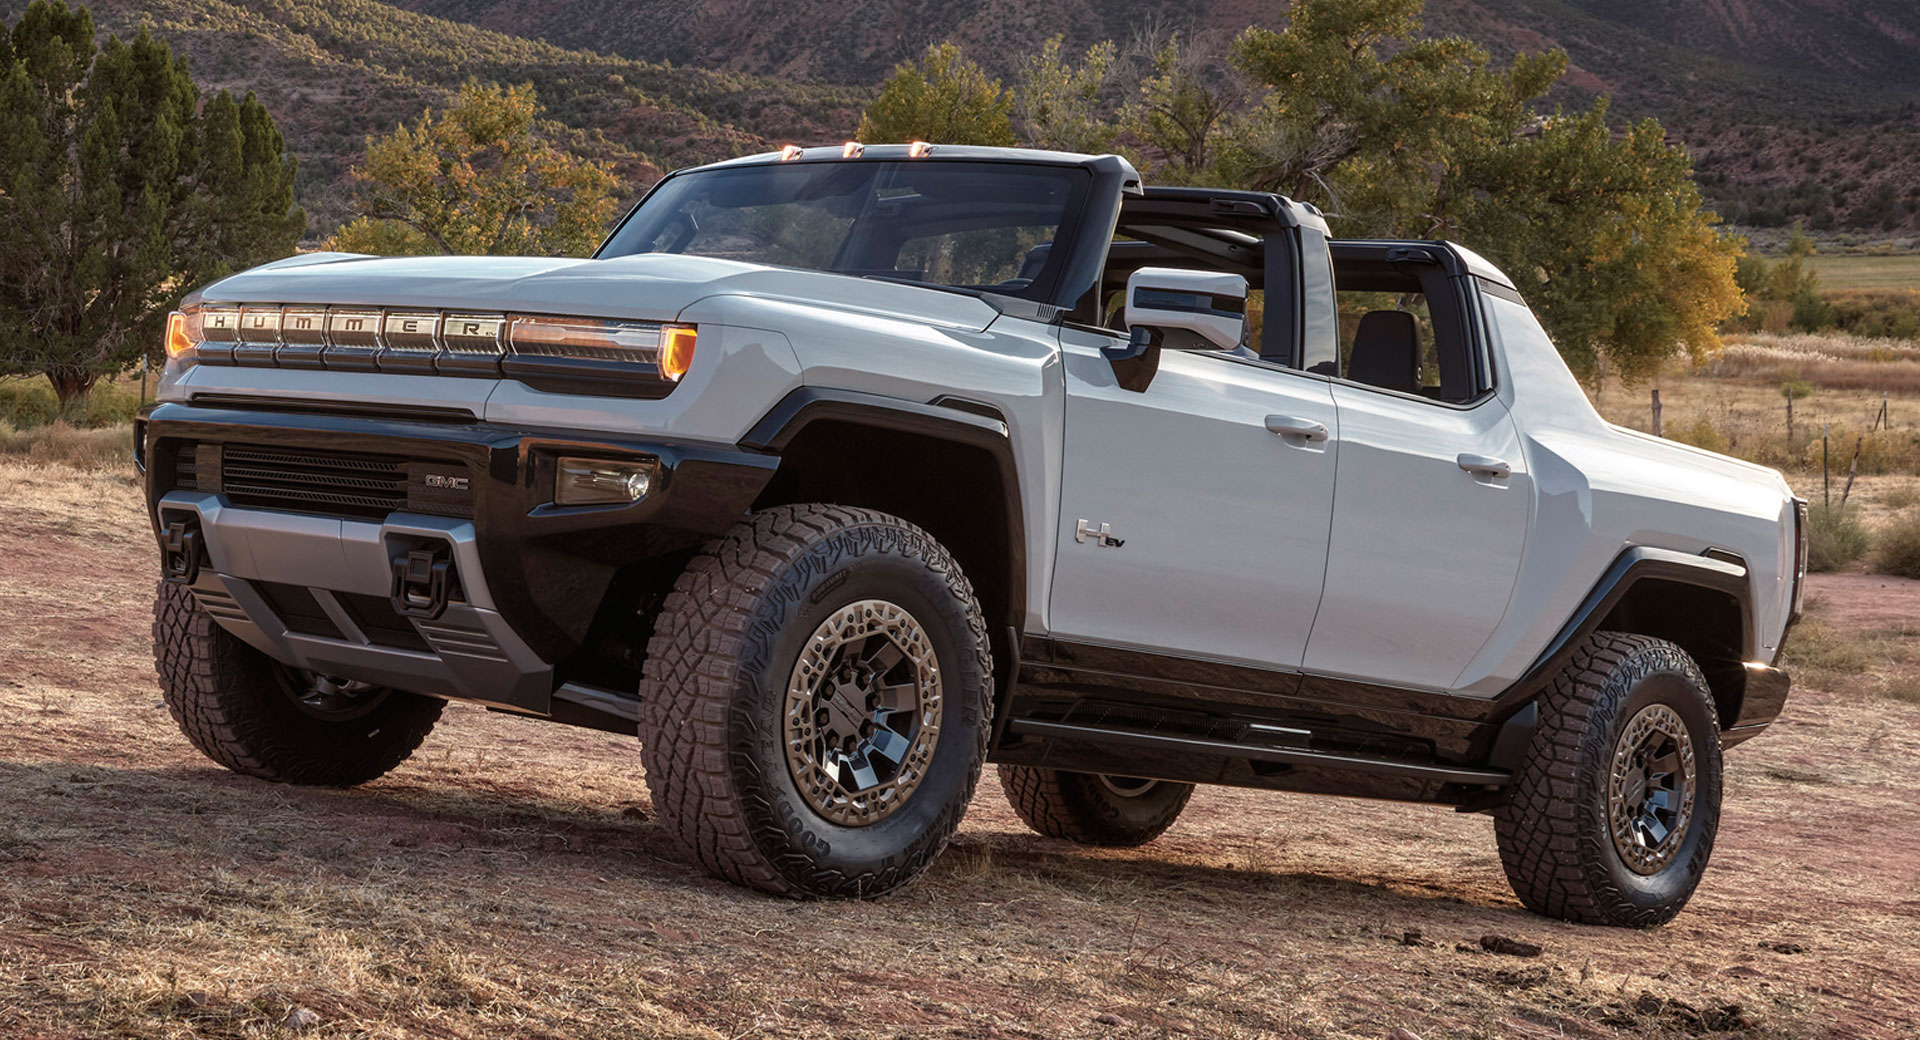 The GMC Hummer EV SUT Weighs 9,063 Lbs, Its Battery Alone Is Heavier